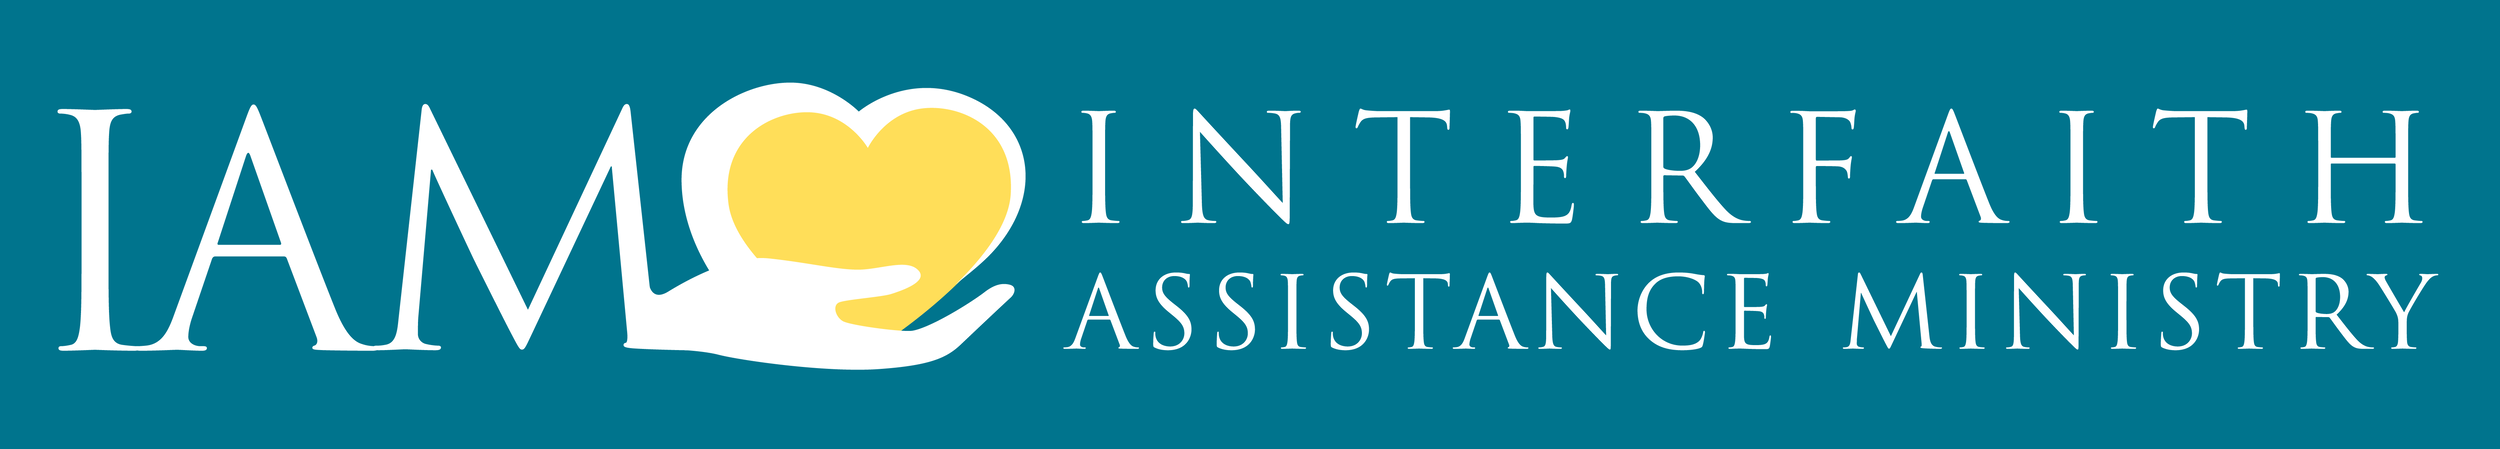 Interfaith Assistance Ministry